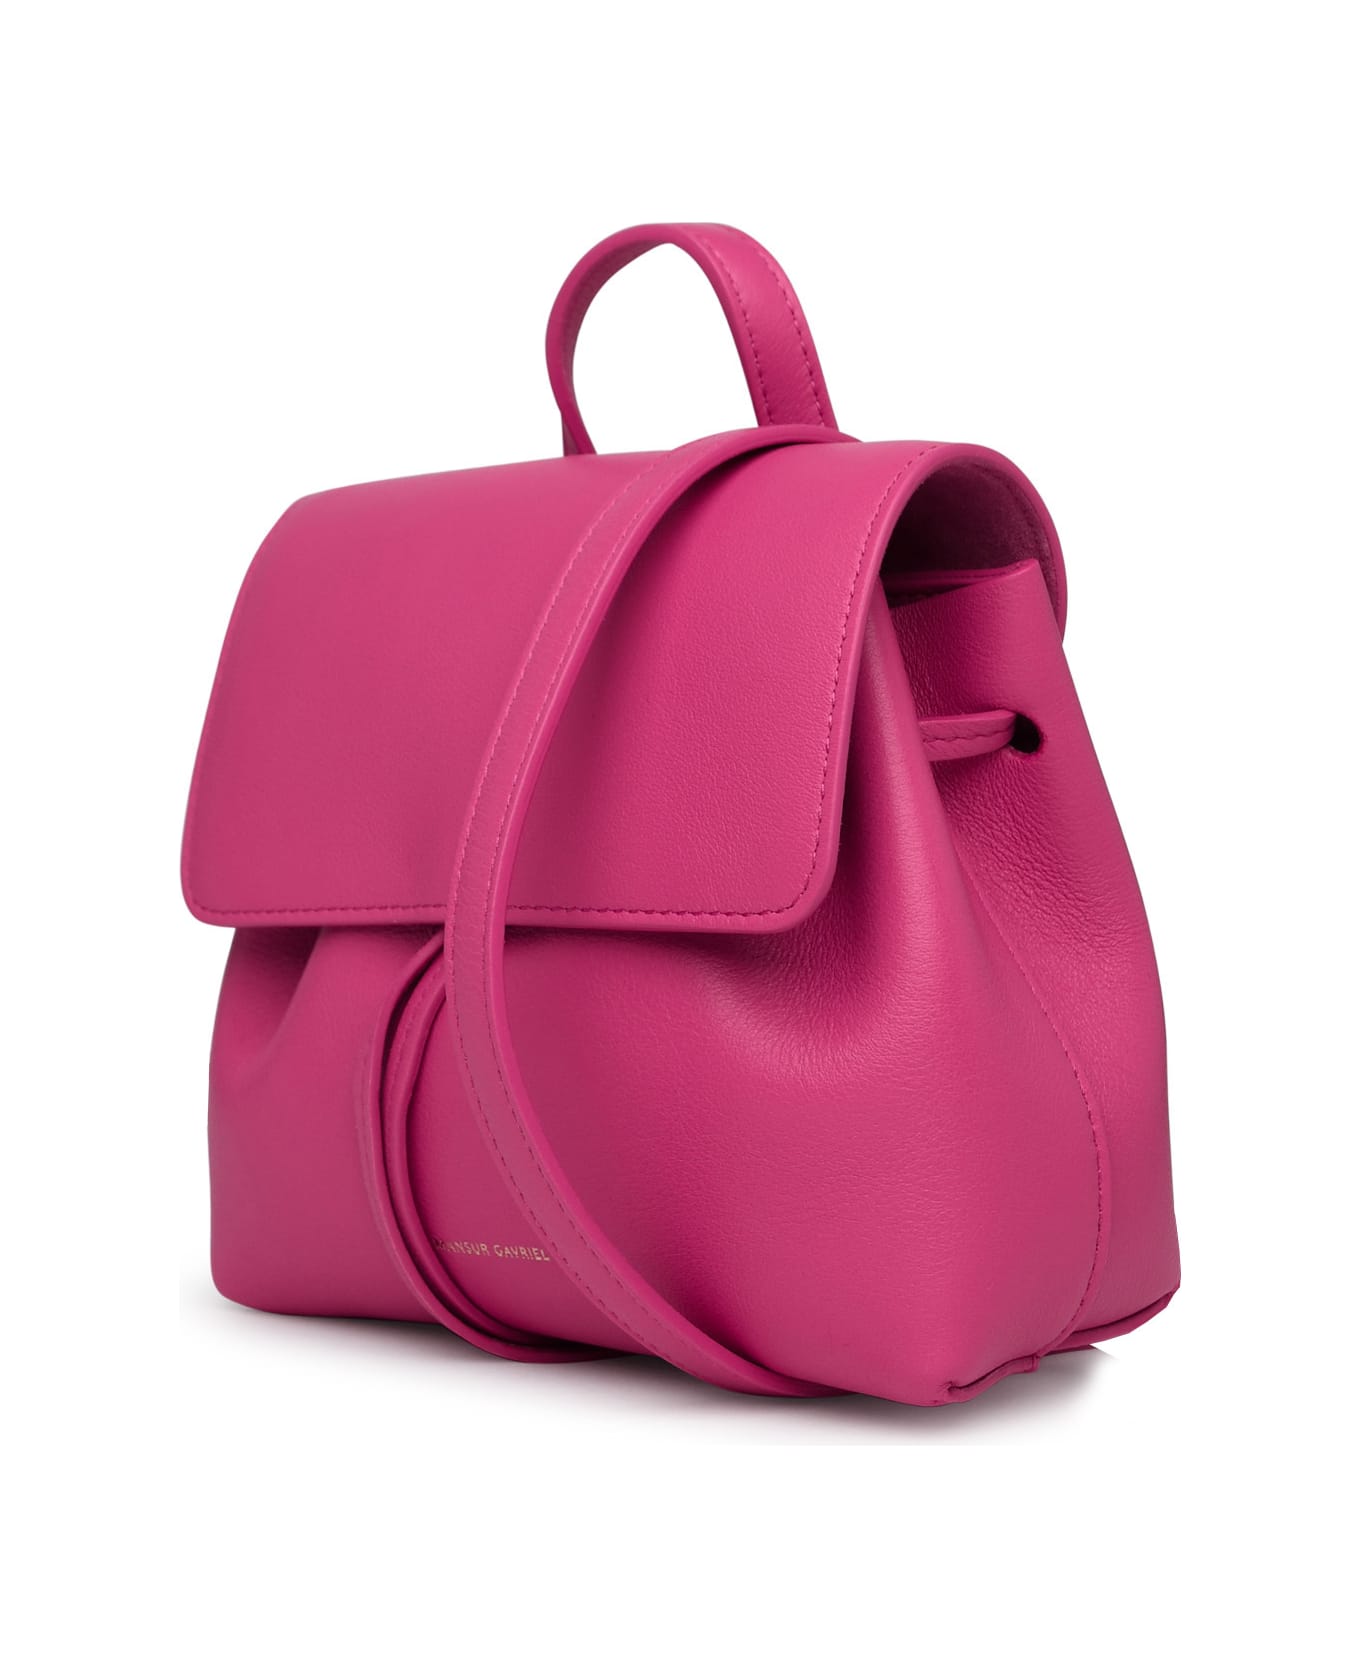 Mansur Gavriel Small 'lady Soft' Bag In Pink Leather - Pink バックパック